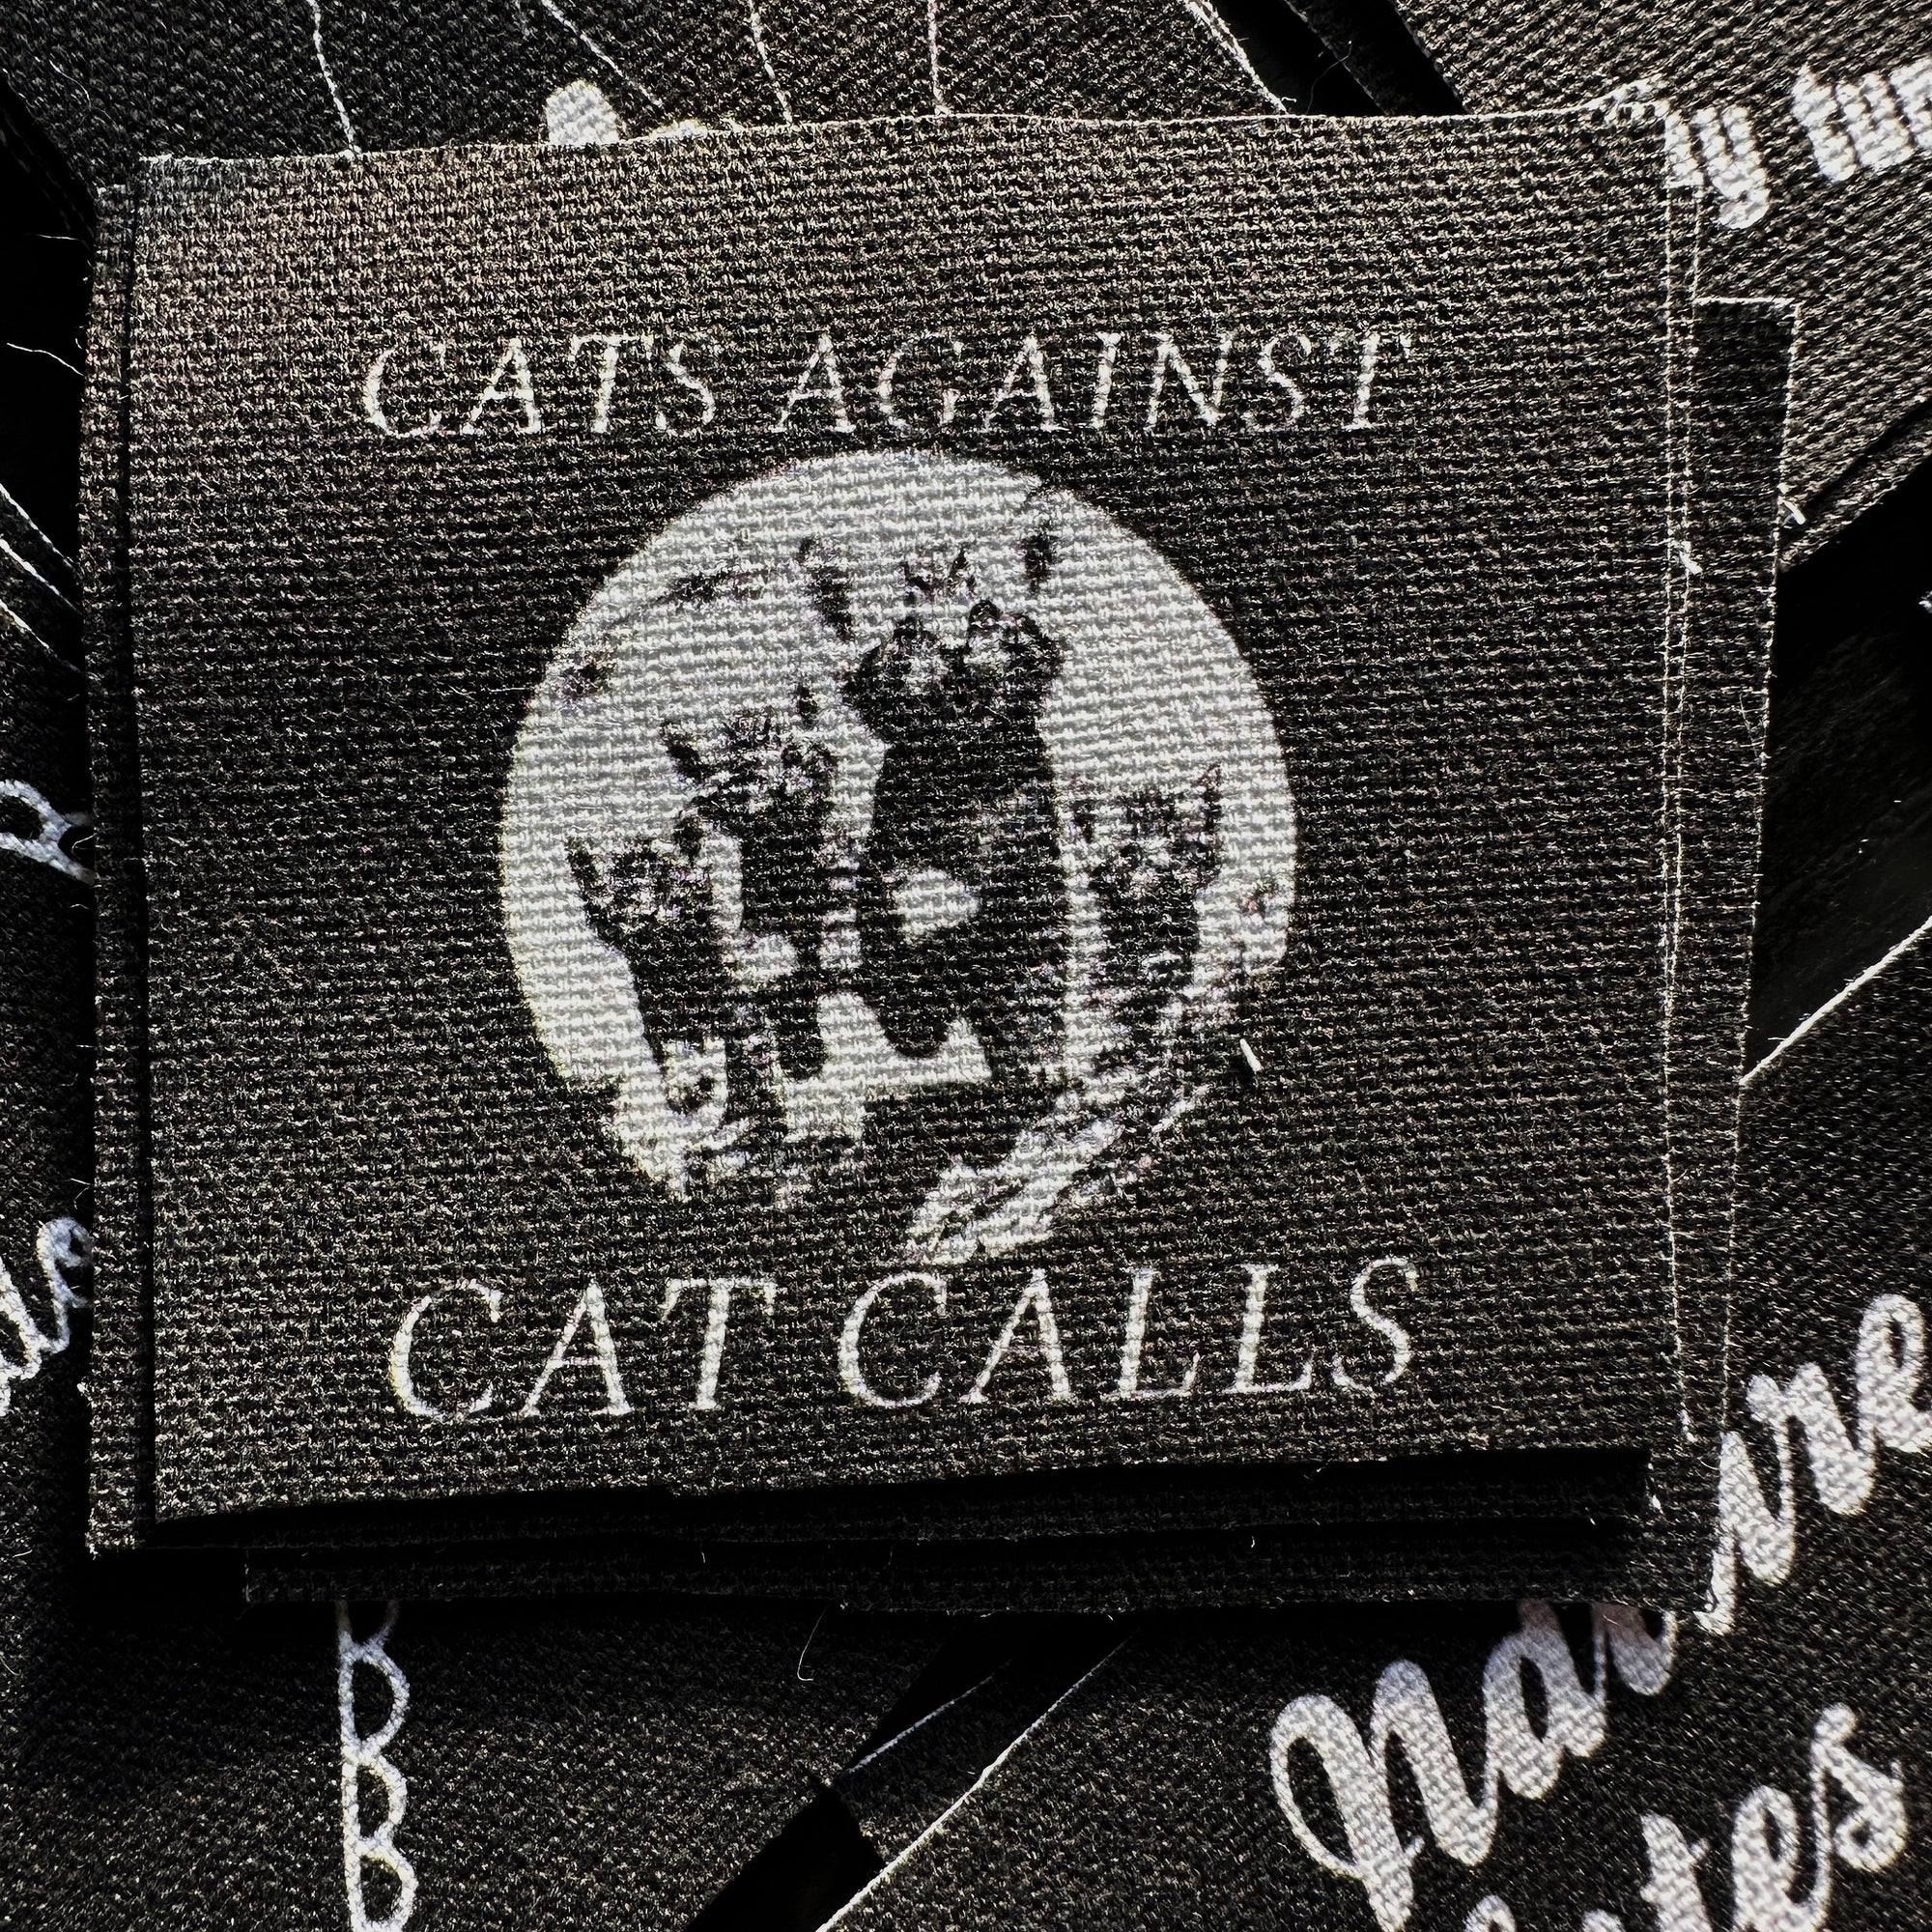 Cat Calls Sewn On Patch | Punk Feminist Accessories DIY Handmade Horror Fabric Patches | Cats Against Cat Calls | 3x3"